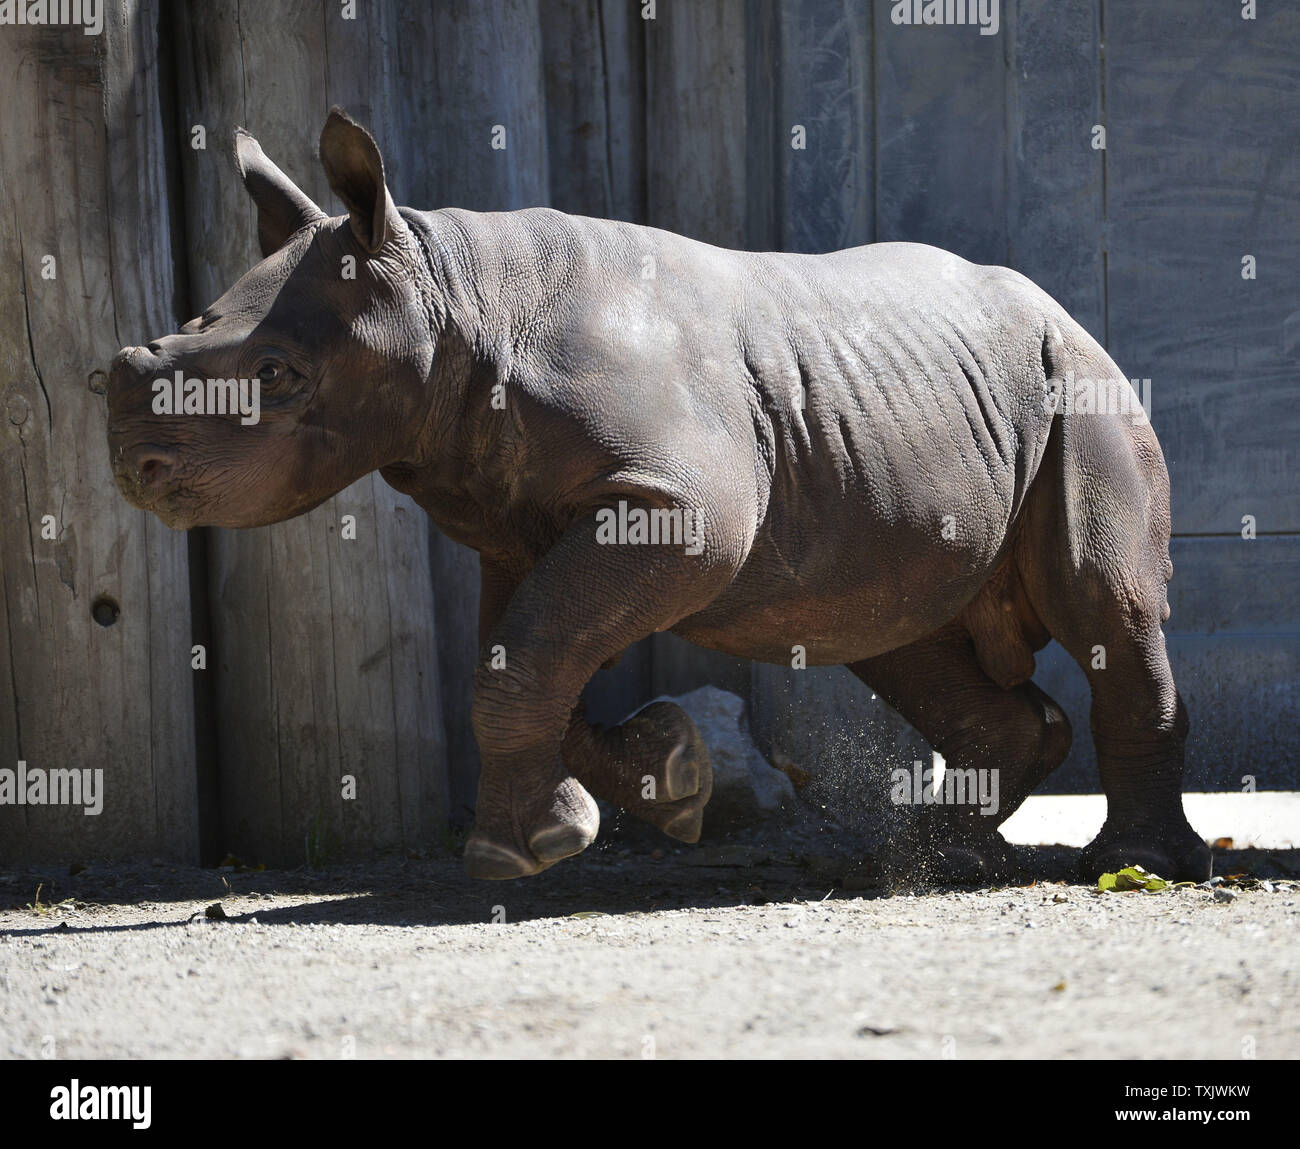 King, a one-month-old eastern black rhinoceros, runs in its habitat at the Lincoln Park Zoo in Chicago on September, 26, 2013. King, who made its public debut on September 17, was born on August 26 and is the first of the species born at the zoo since 1989. The eastern black rhinoceros is an endangered species with only 5,000 surviving in the wild.    UPI/Brian Kersey Stock Photo